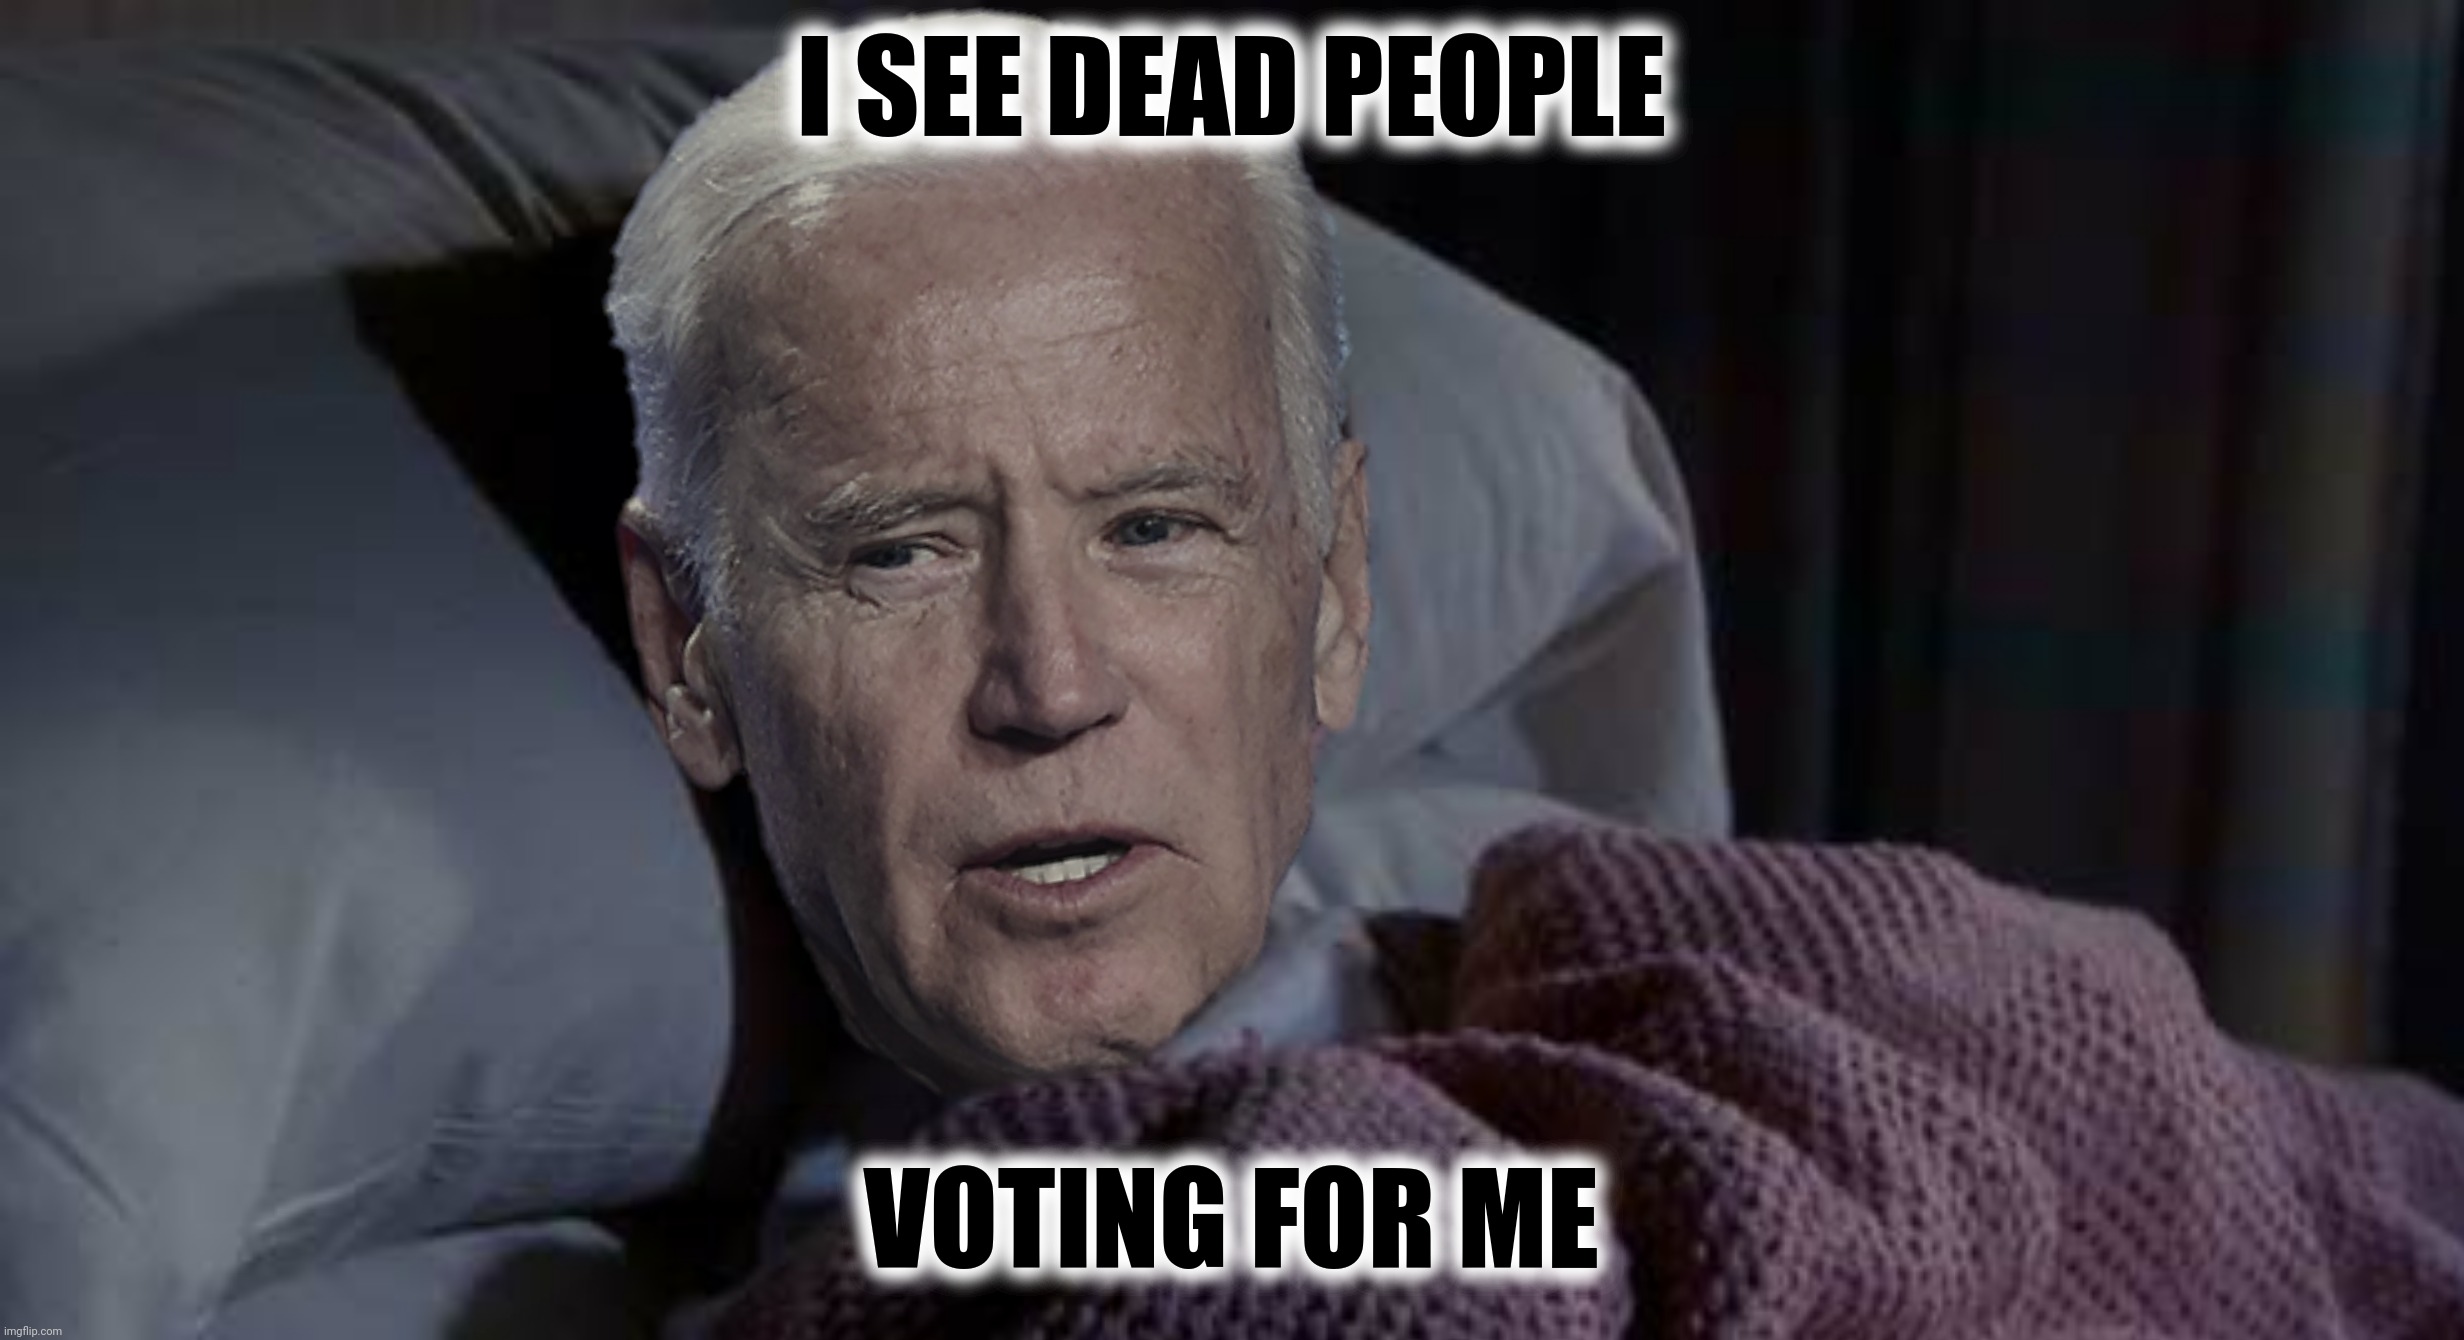 I SEE DEAD PEOPLE VOTING FOR ME | made w/ Imgflip meme maker